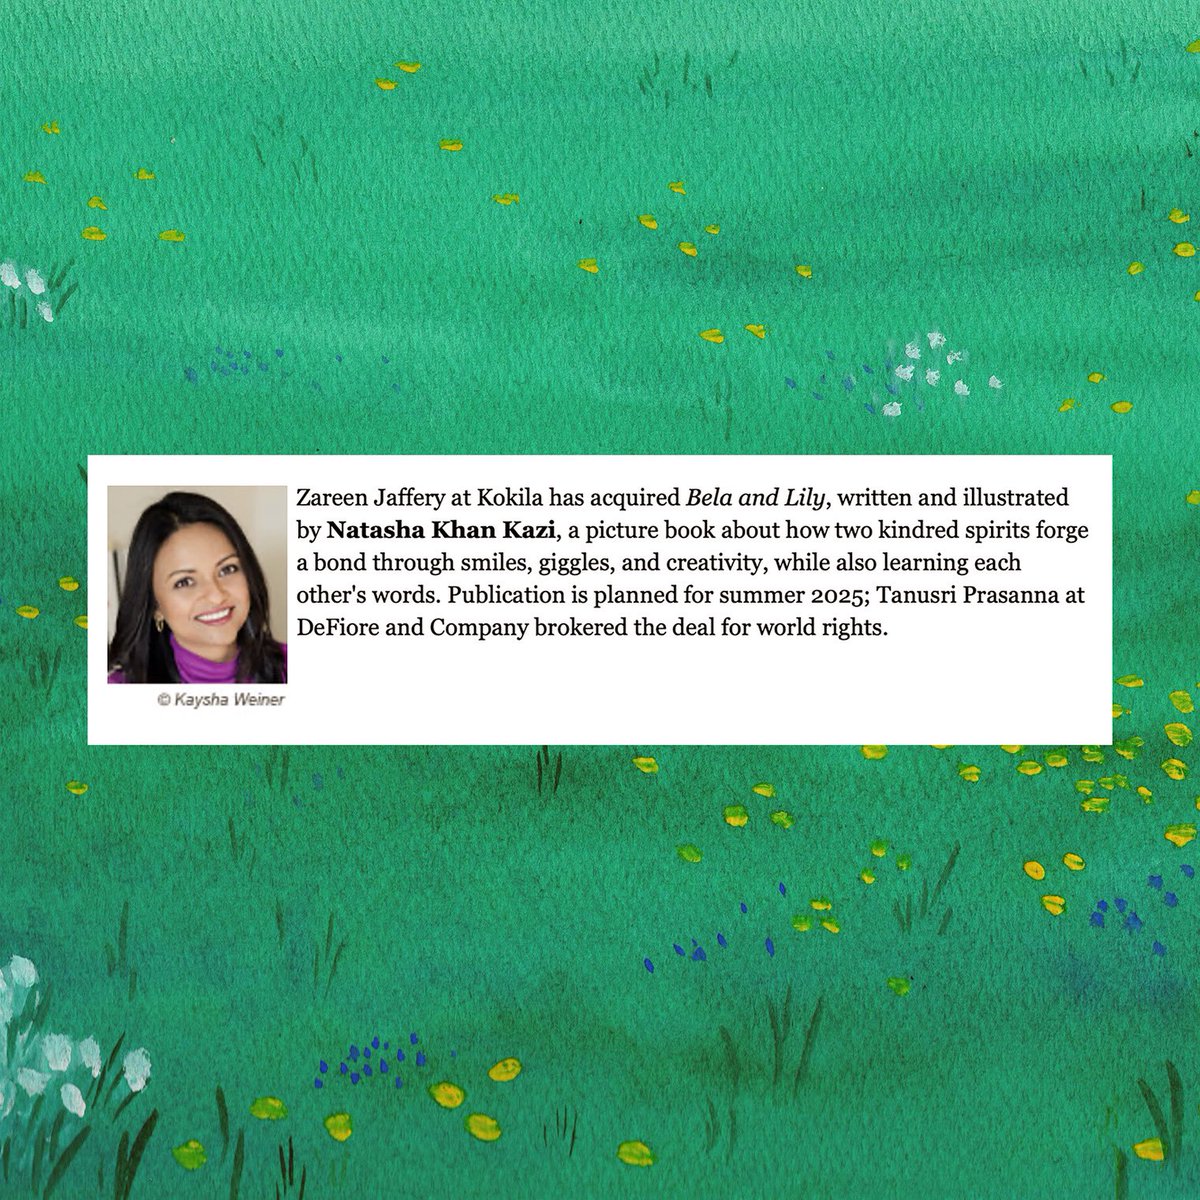 Book news! I wrote a story about friendship for immigrant kids, ESL kids, curious kids, kind kids, all kids. So grateful for my agent @TanusriPrasanna, my Editor @ZareenJaffery, Art Director Asiya Ahmed and the team at @KokilaBooks for all their encouragement and support. 💚